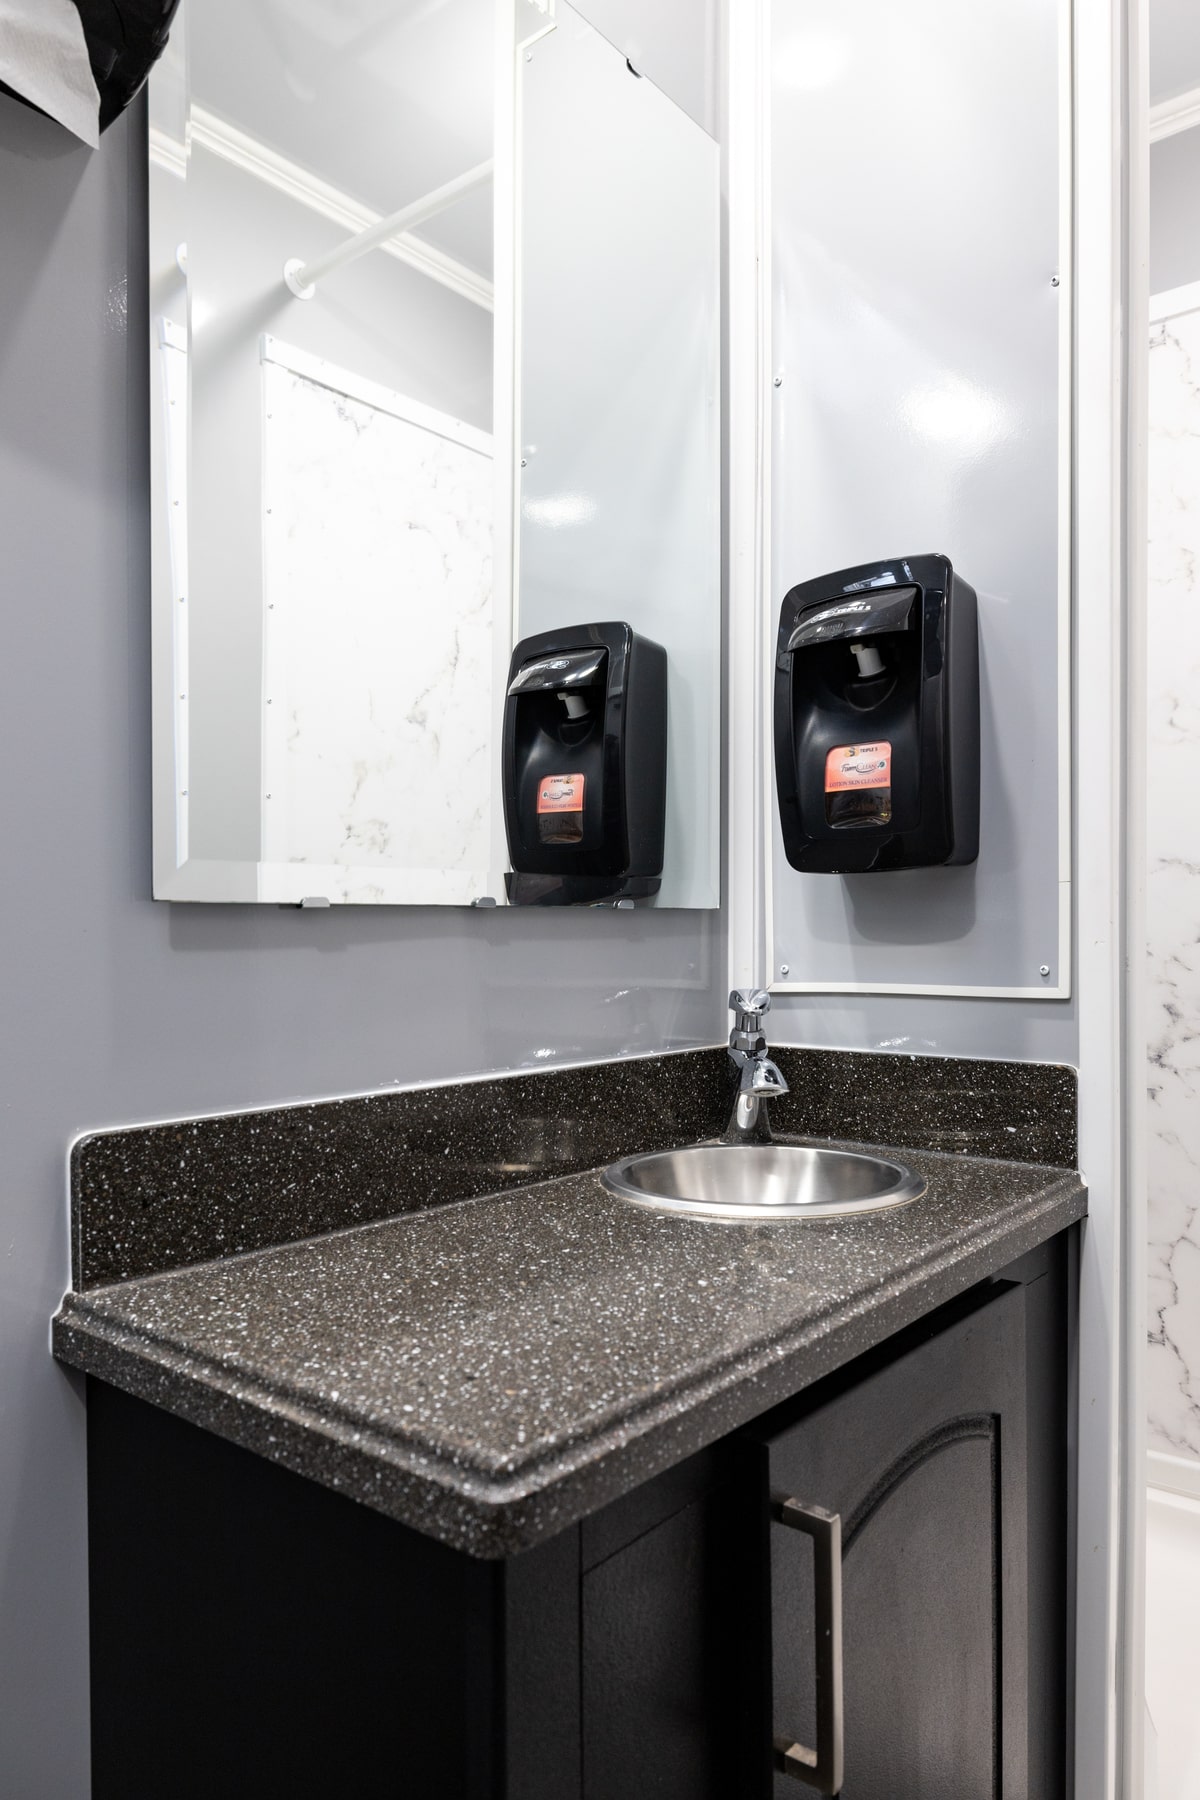 Our 8-Station Shower Trailers have hot & cold water